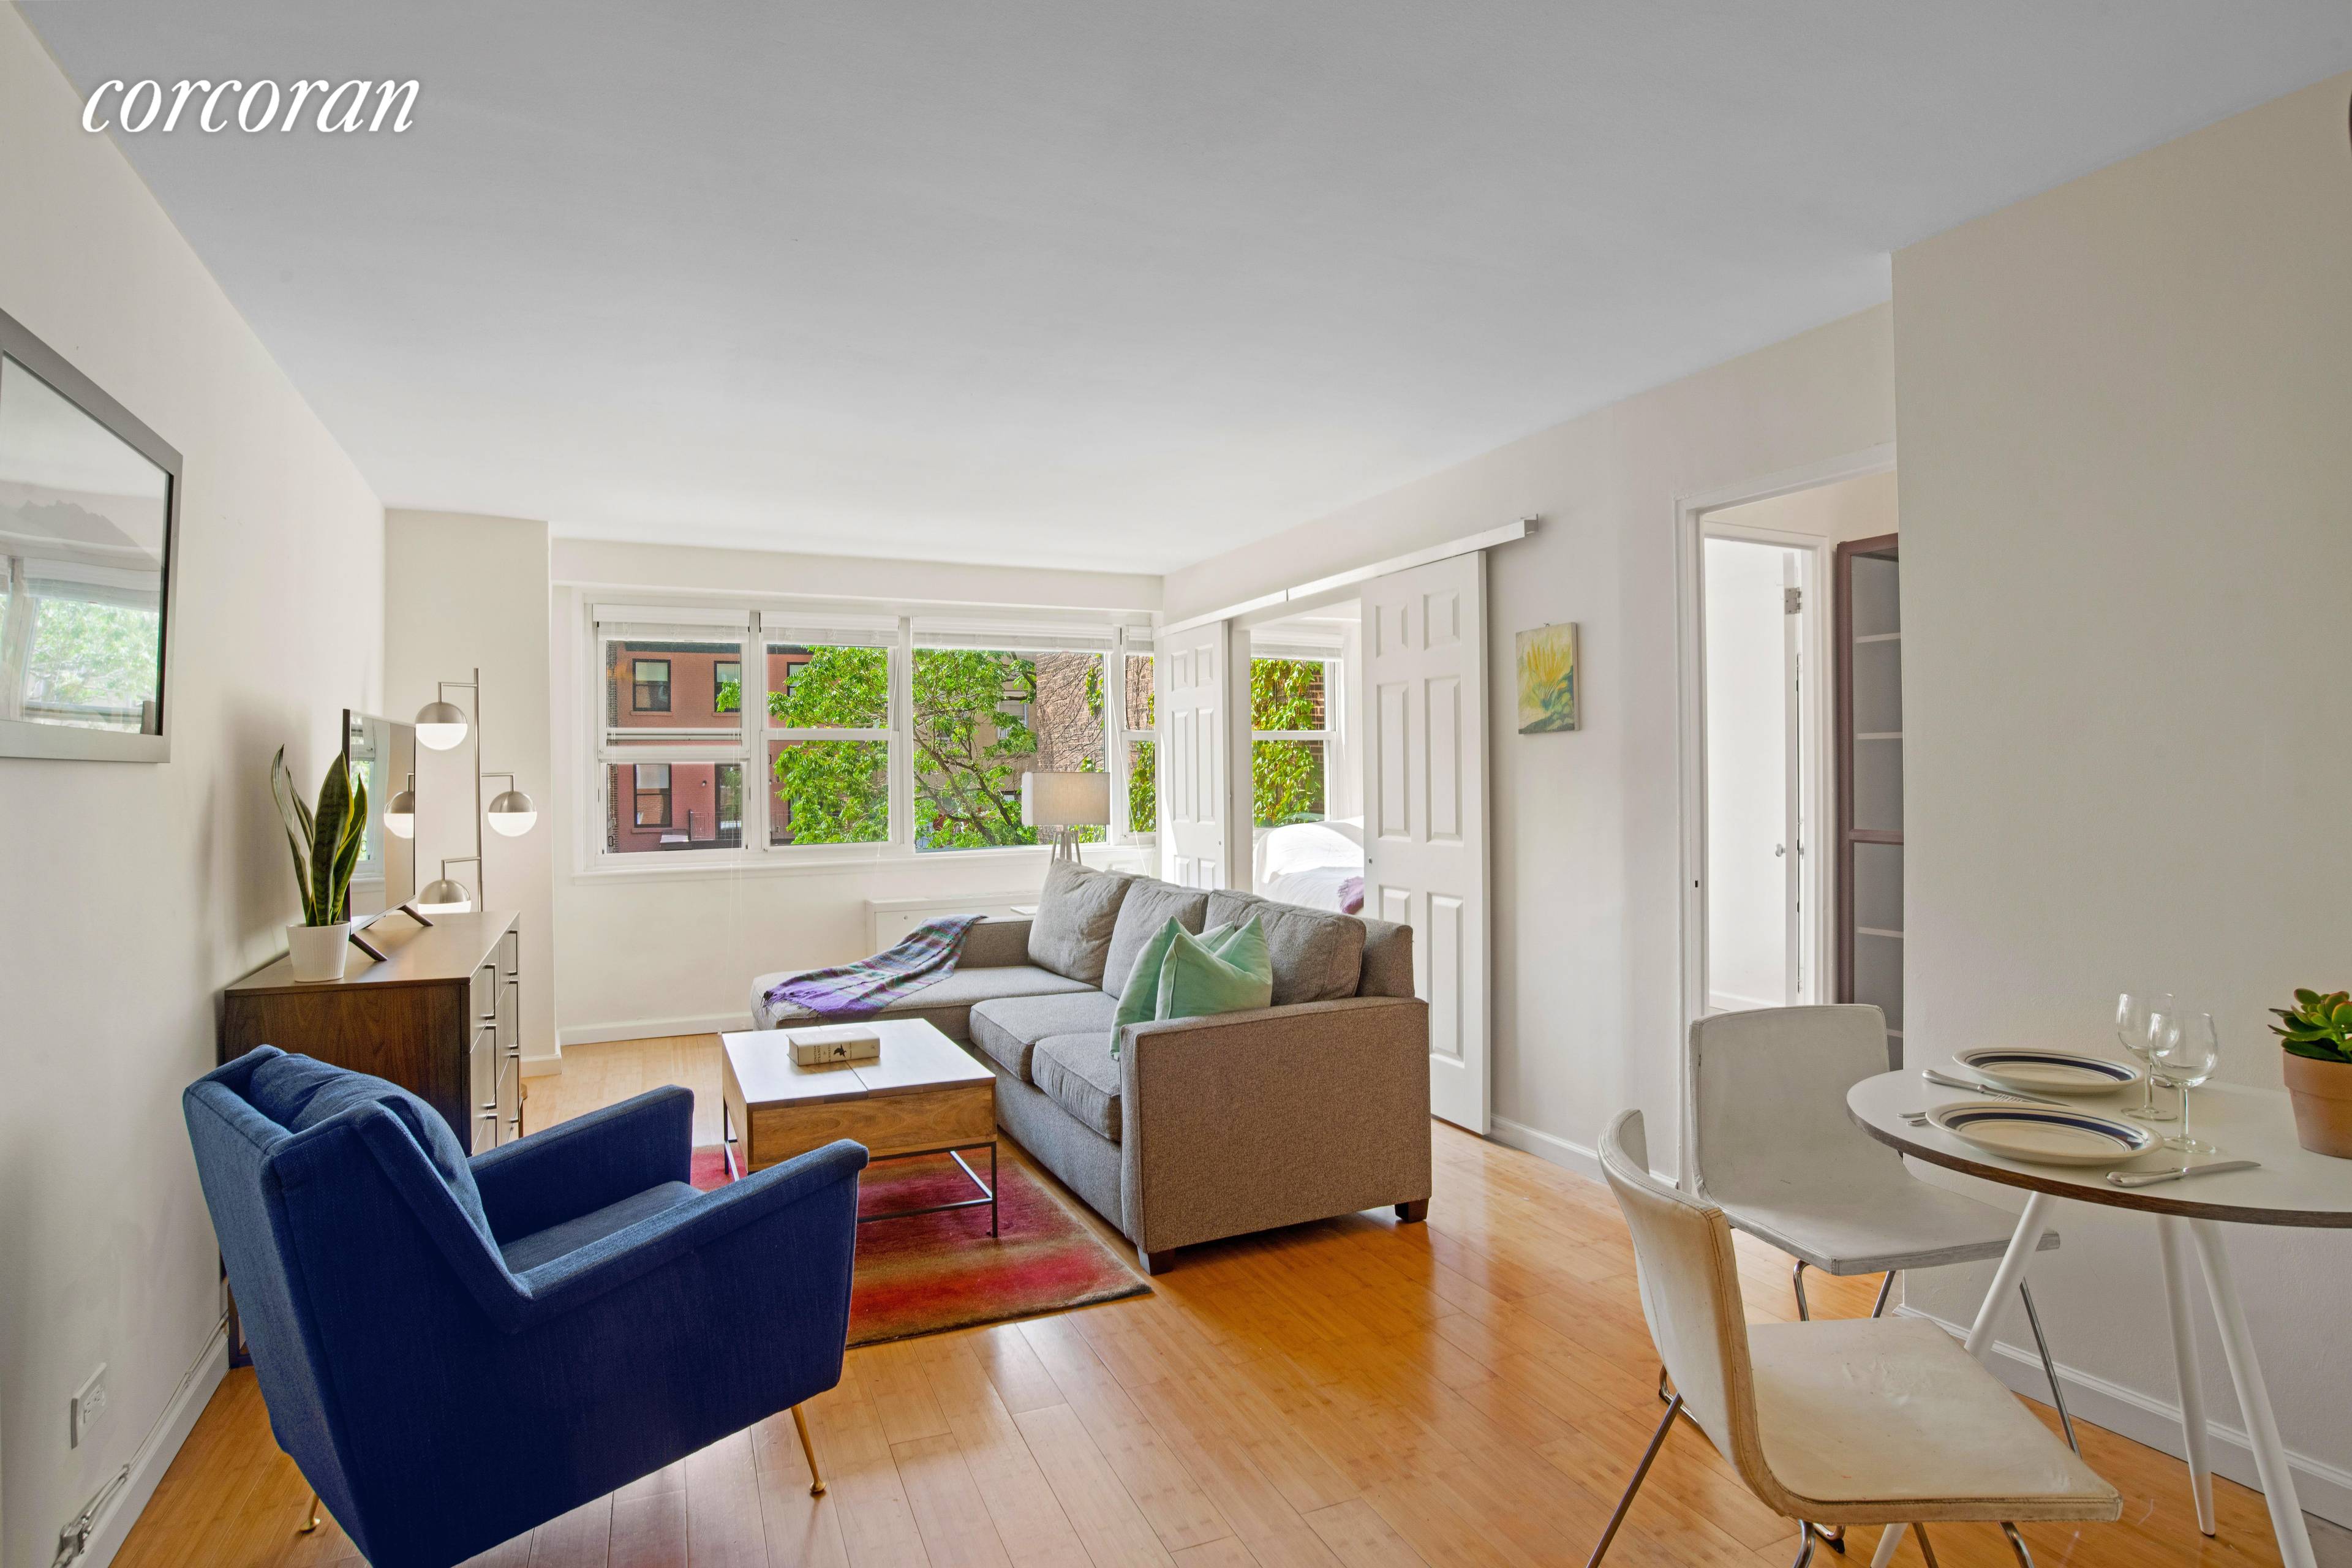 This is a serene and perfectly appointed junior one bedroom apartment located in historic Brooklyn Heights.